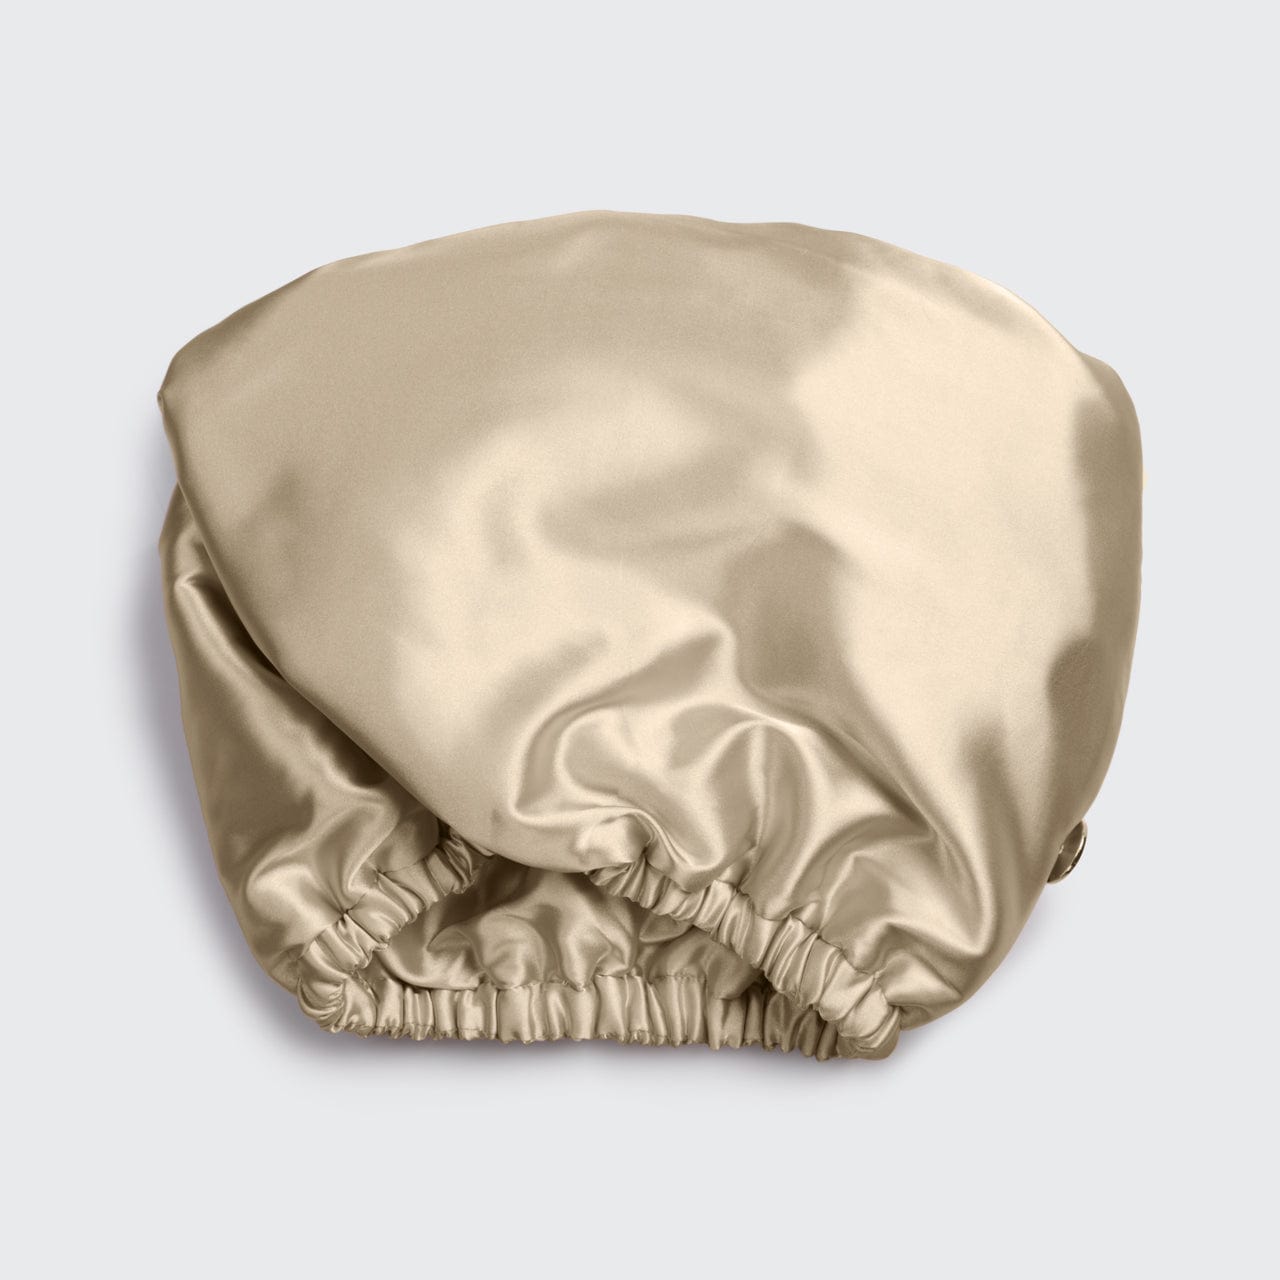 Satin-Wrapped Hair Towel - Champagne